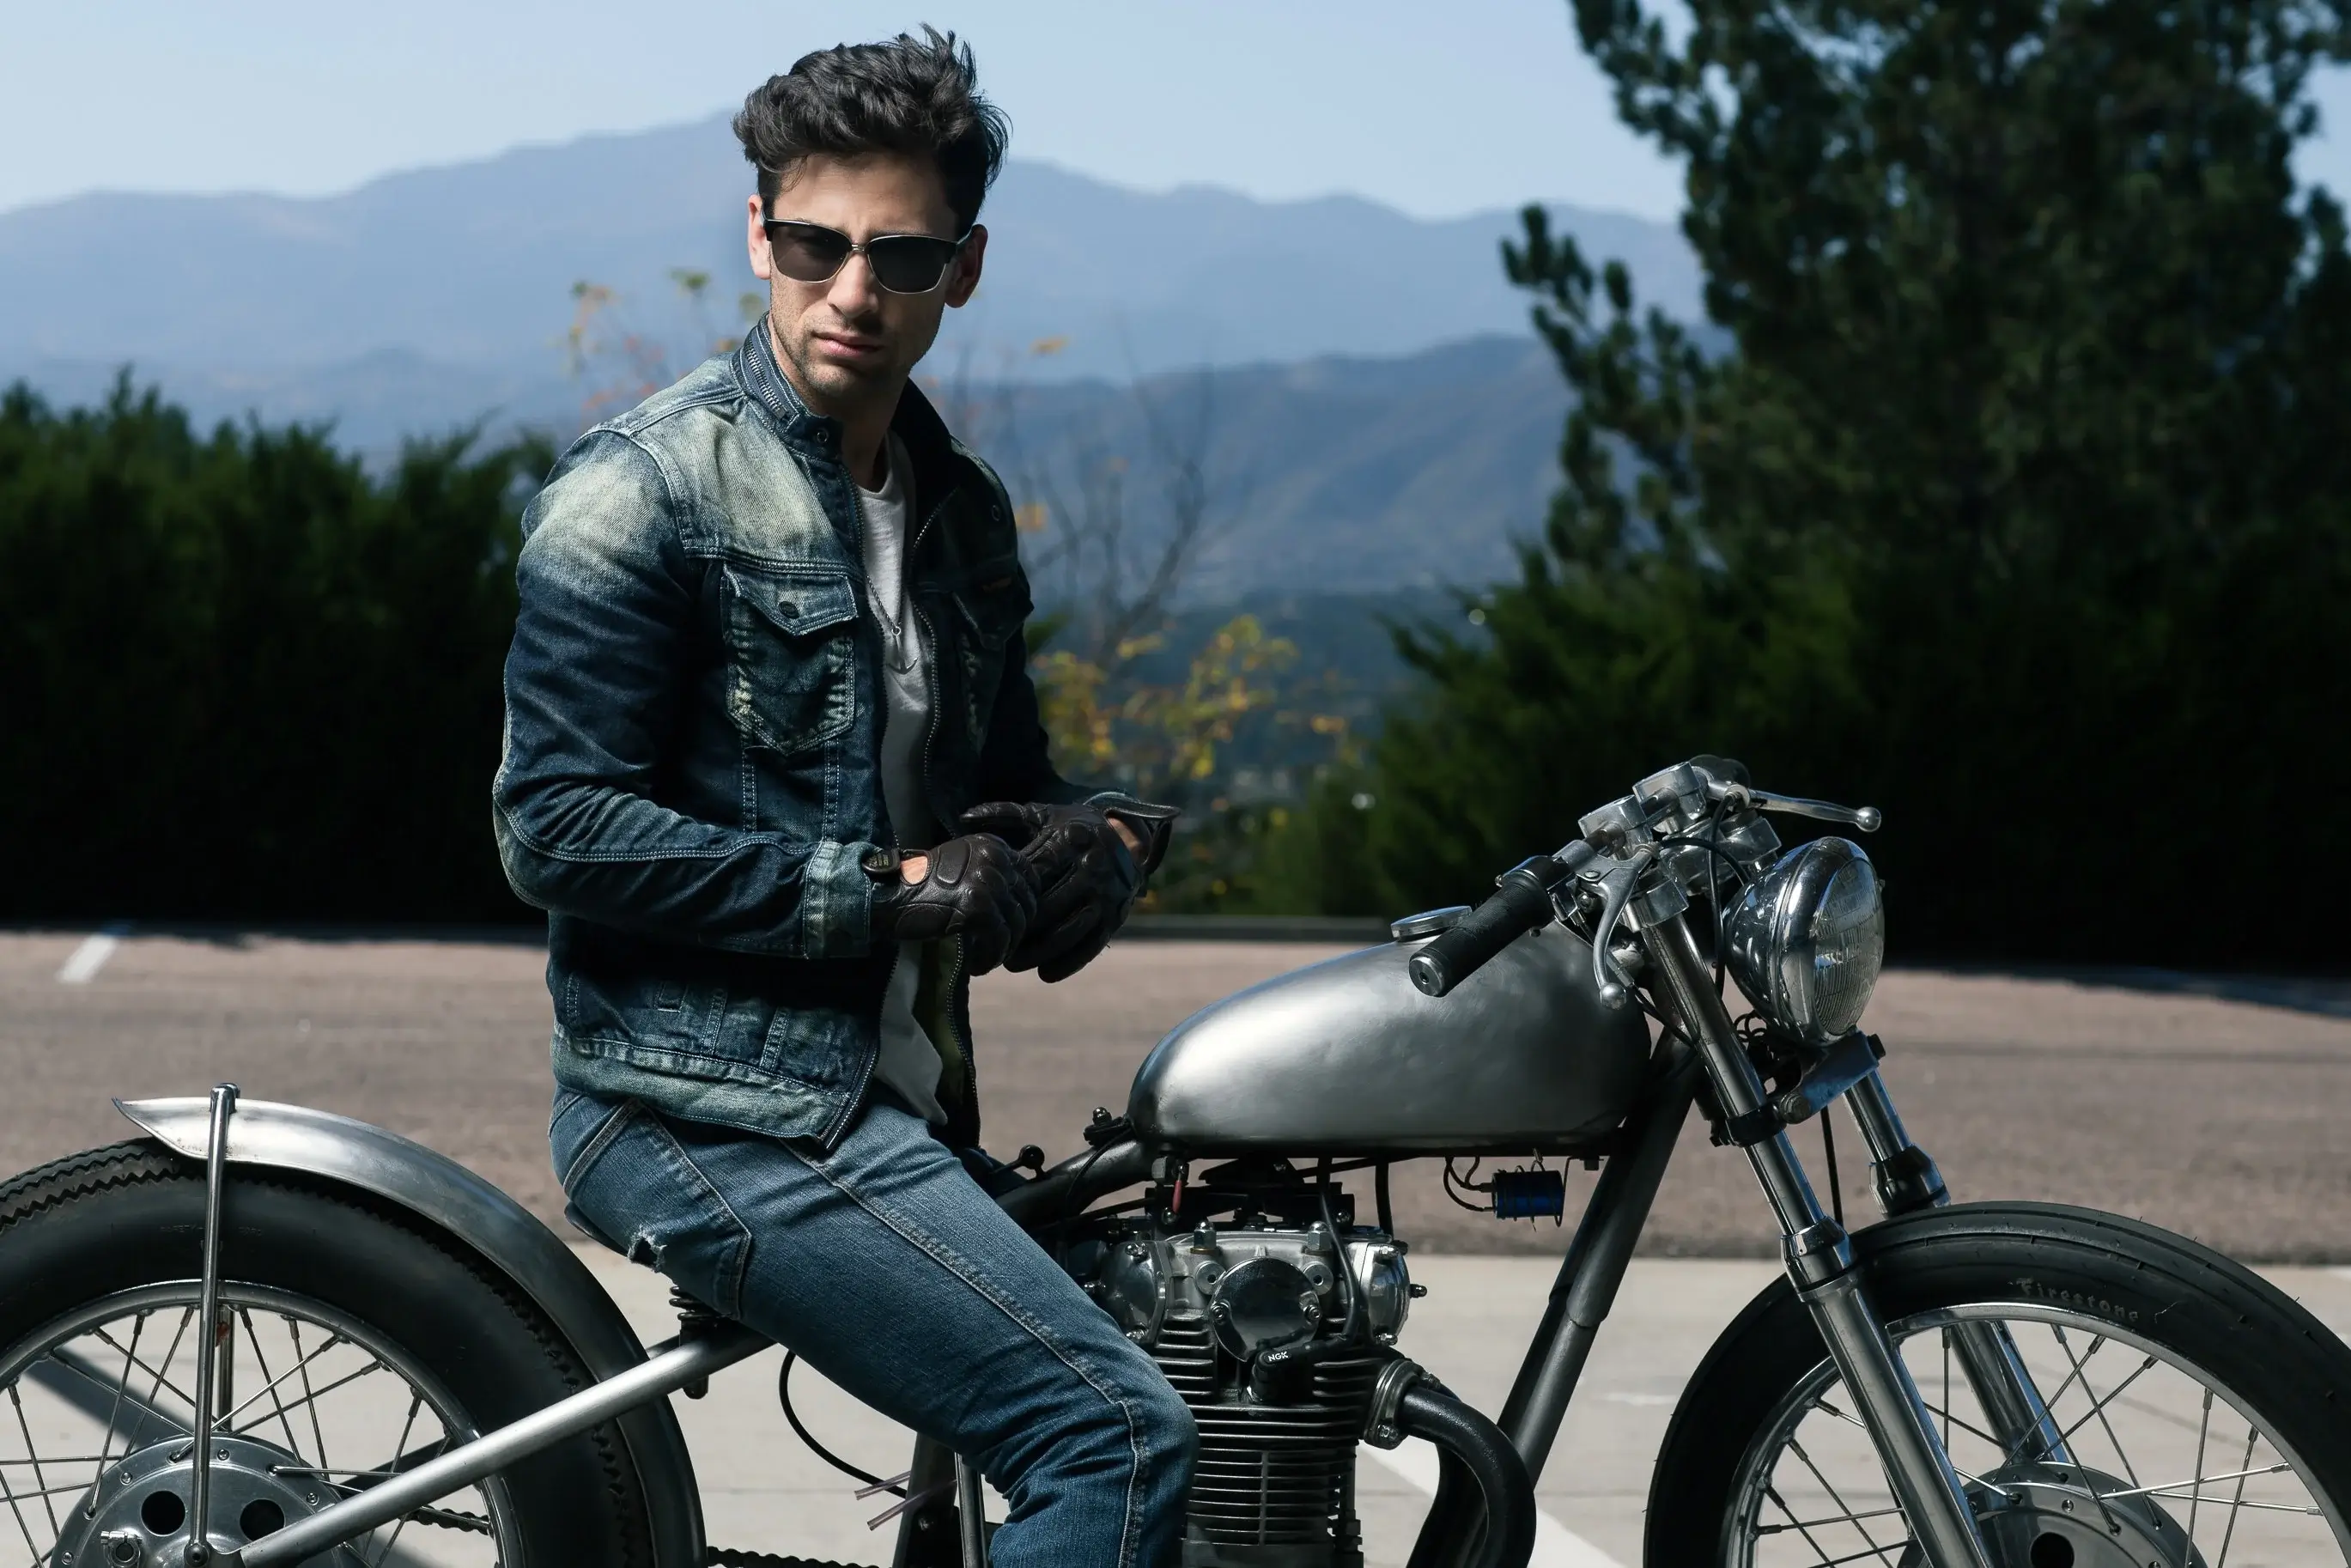 We Have the Best Motorcycle Sunglasses for Your Ride